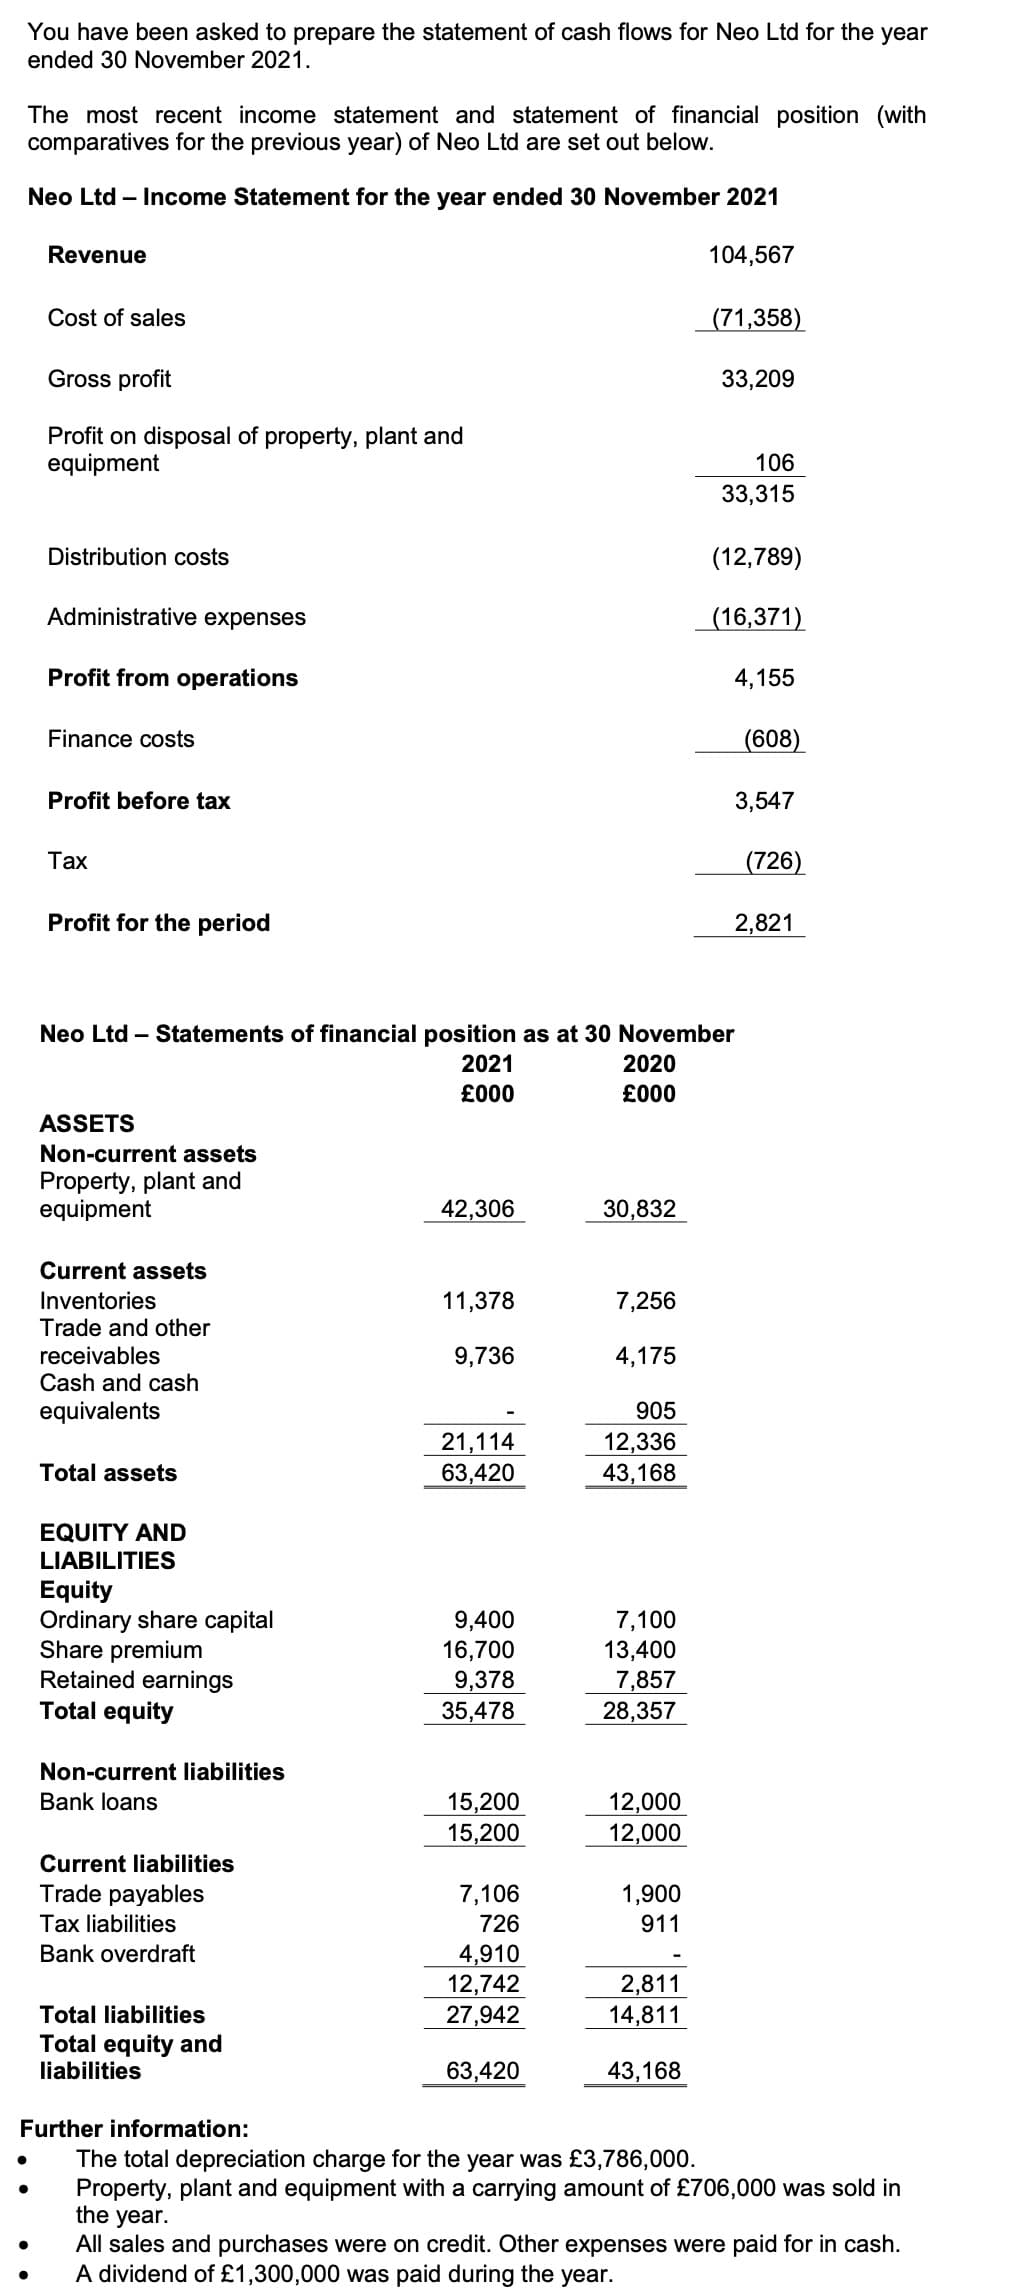 You have been asked to prepare the statement of cash flows for Neo Ltd for the year
ended 30 November 2021.
The most recent income statement and statement of financial position (with
comparatives for the previous year) of Neo Ltd are set out below.
Neo Ltd – Income Statement for the year ended 30 November 2021
Revenue
104,567
Cost of sales
(71,358)
Gross profit
33,209
Profit on disposal of property, plant and
equipment
106
33,315
Distribution costs
(12,789)
Administrative expenses
(16,371)
Profit from operations
4,155
Finance costs
(608)
Profit before tax
3,547
Тах
(726)
Profit for the period
2,821
Neo Ltd – Statements of financial position as at 30 November
2021
2020
£00
£000
ASSETS
Non-current assets
Property, plant and
equipment
42,306
30,832
Current assets
7,256
Inventories
Trade and other
11,378
receivables
Cash and cash
9,736
4,175
equivalents
905
12,336
43,168
21,114
Total assets
63,420
EQUITY AND
LIABILITIES
Equity
Ordinary share capital
Share premium
Retained earnings
Total equity
9,400
16,700
9,378
35,478
7,100
13,400
7,857
28,357
Non-current liabilities
Bank loans
12,000
12,000
15,200
15,200
Current liabilities
Trade payables
7,106
1,900
Tax liabilities
726
911
Bank overdraft
4,910
12,742
27,942
2,811
Total liabilities
14,811
Total equity and
liabilities
63,420
43,168
Further information:
The total depreciation charge for the year was £3,786,000.
Property, plant and equipment with a carrying amount of £706,000 was sold in
the year.
All sales and purchases were on credit. Other expenses were paid for in cash.
A dividend of £1,300,000 was paid during the year.
